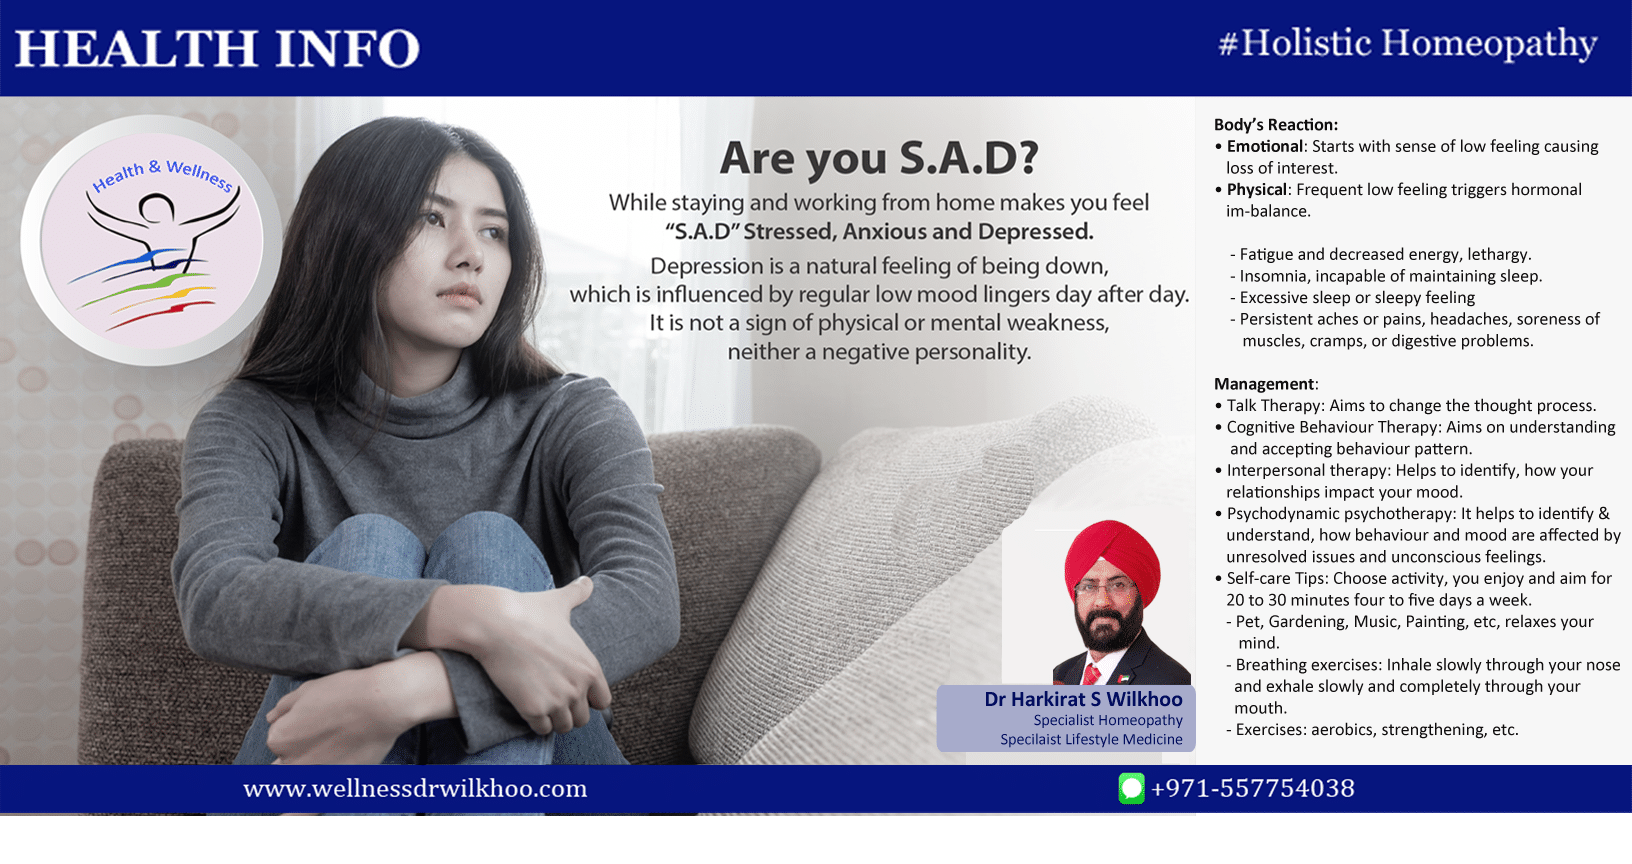 Know More About S.A.D Syndrome!